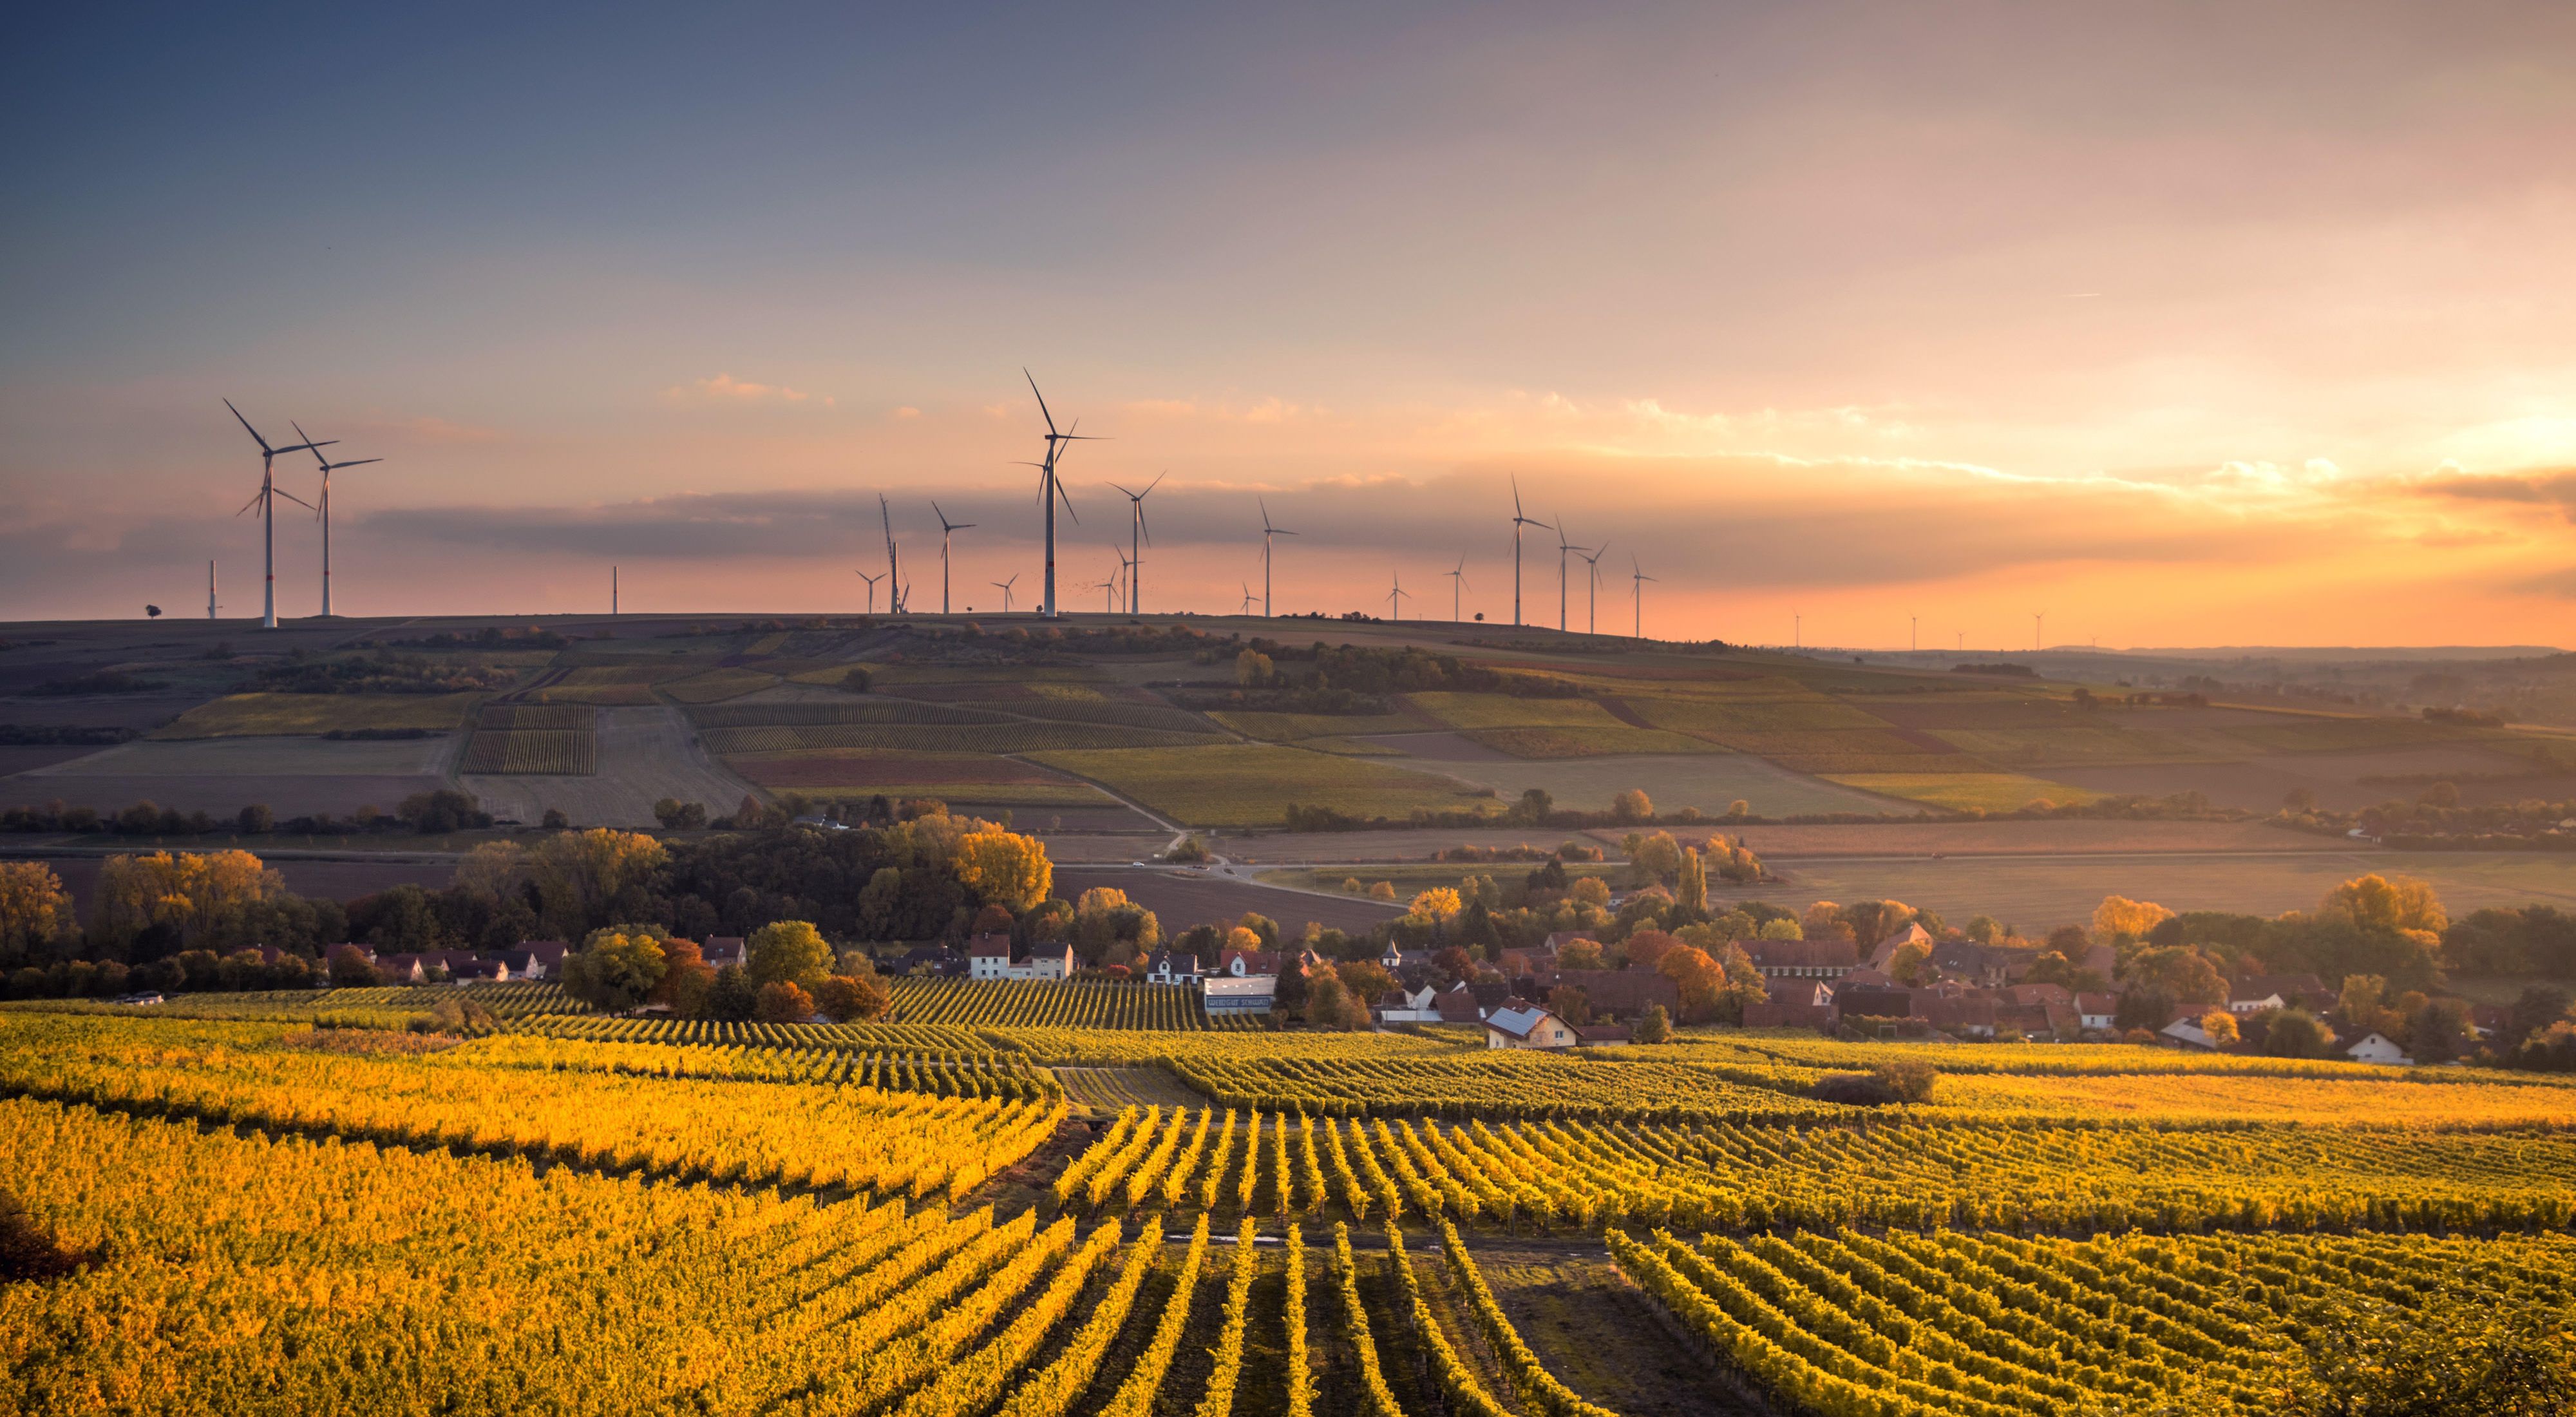 Agricultural fields and wind turbines in the sunset.